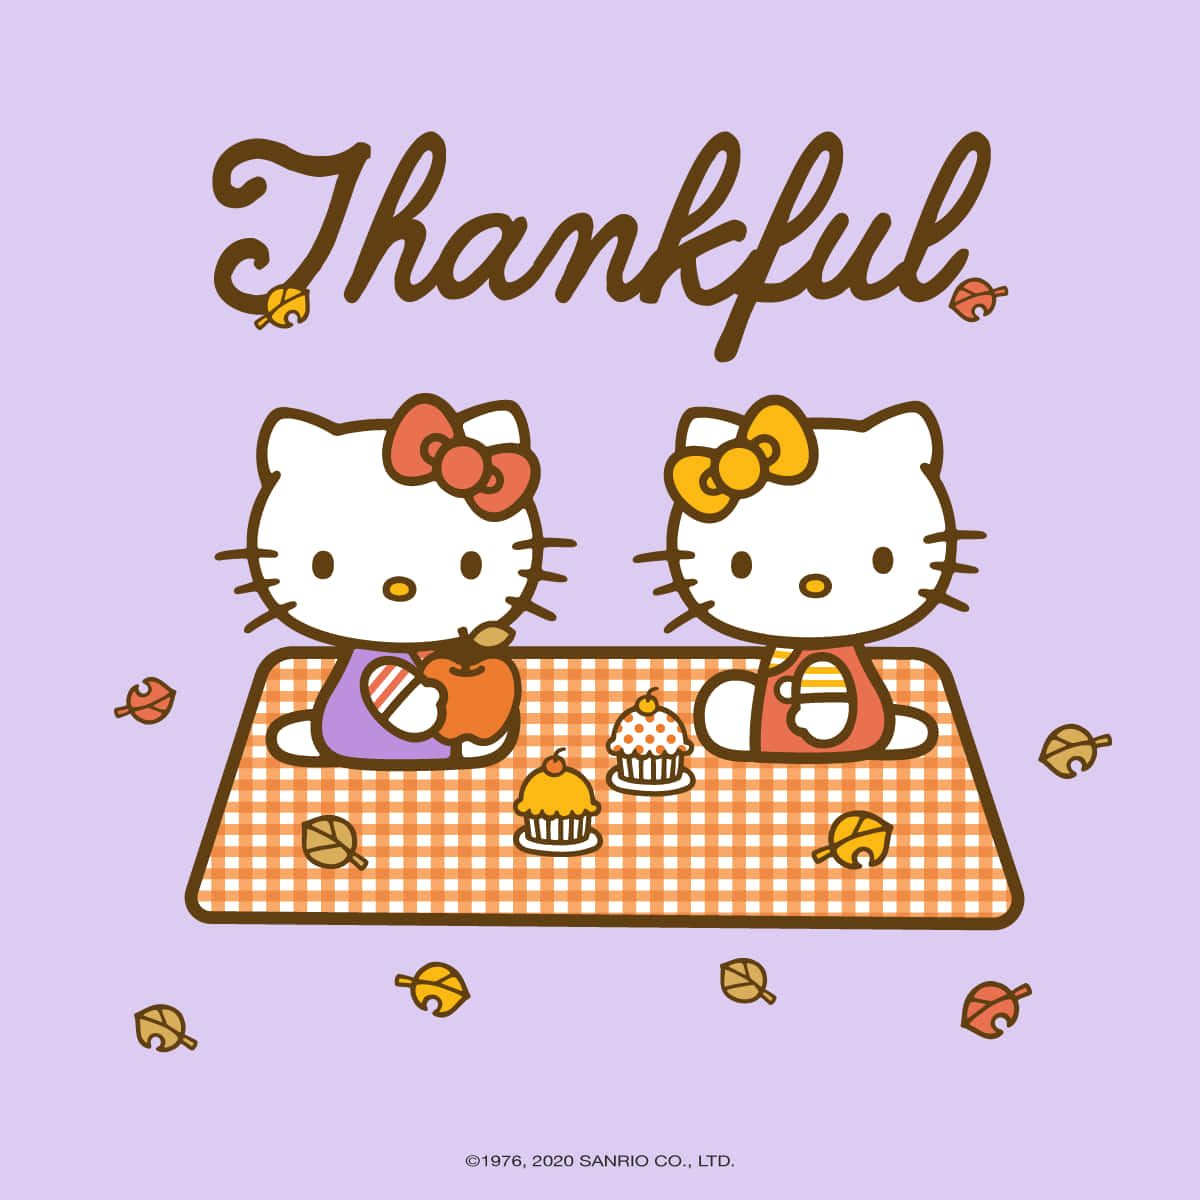 Download “Happy Thanksgiving With Hello Kitty” Wallpaper | Wallpapers.com